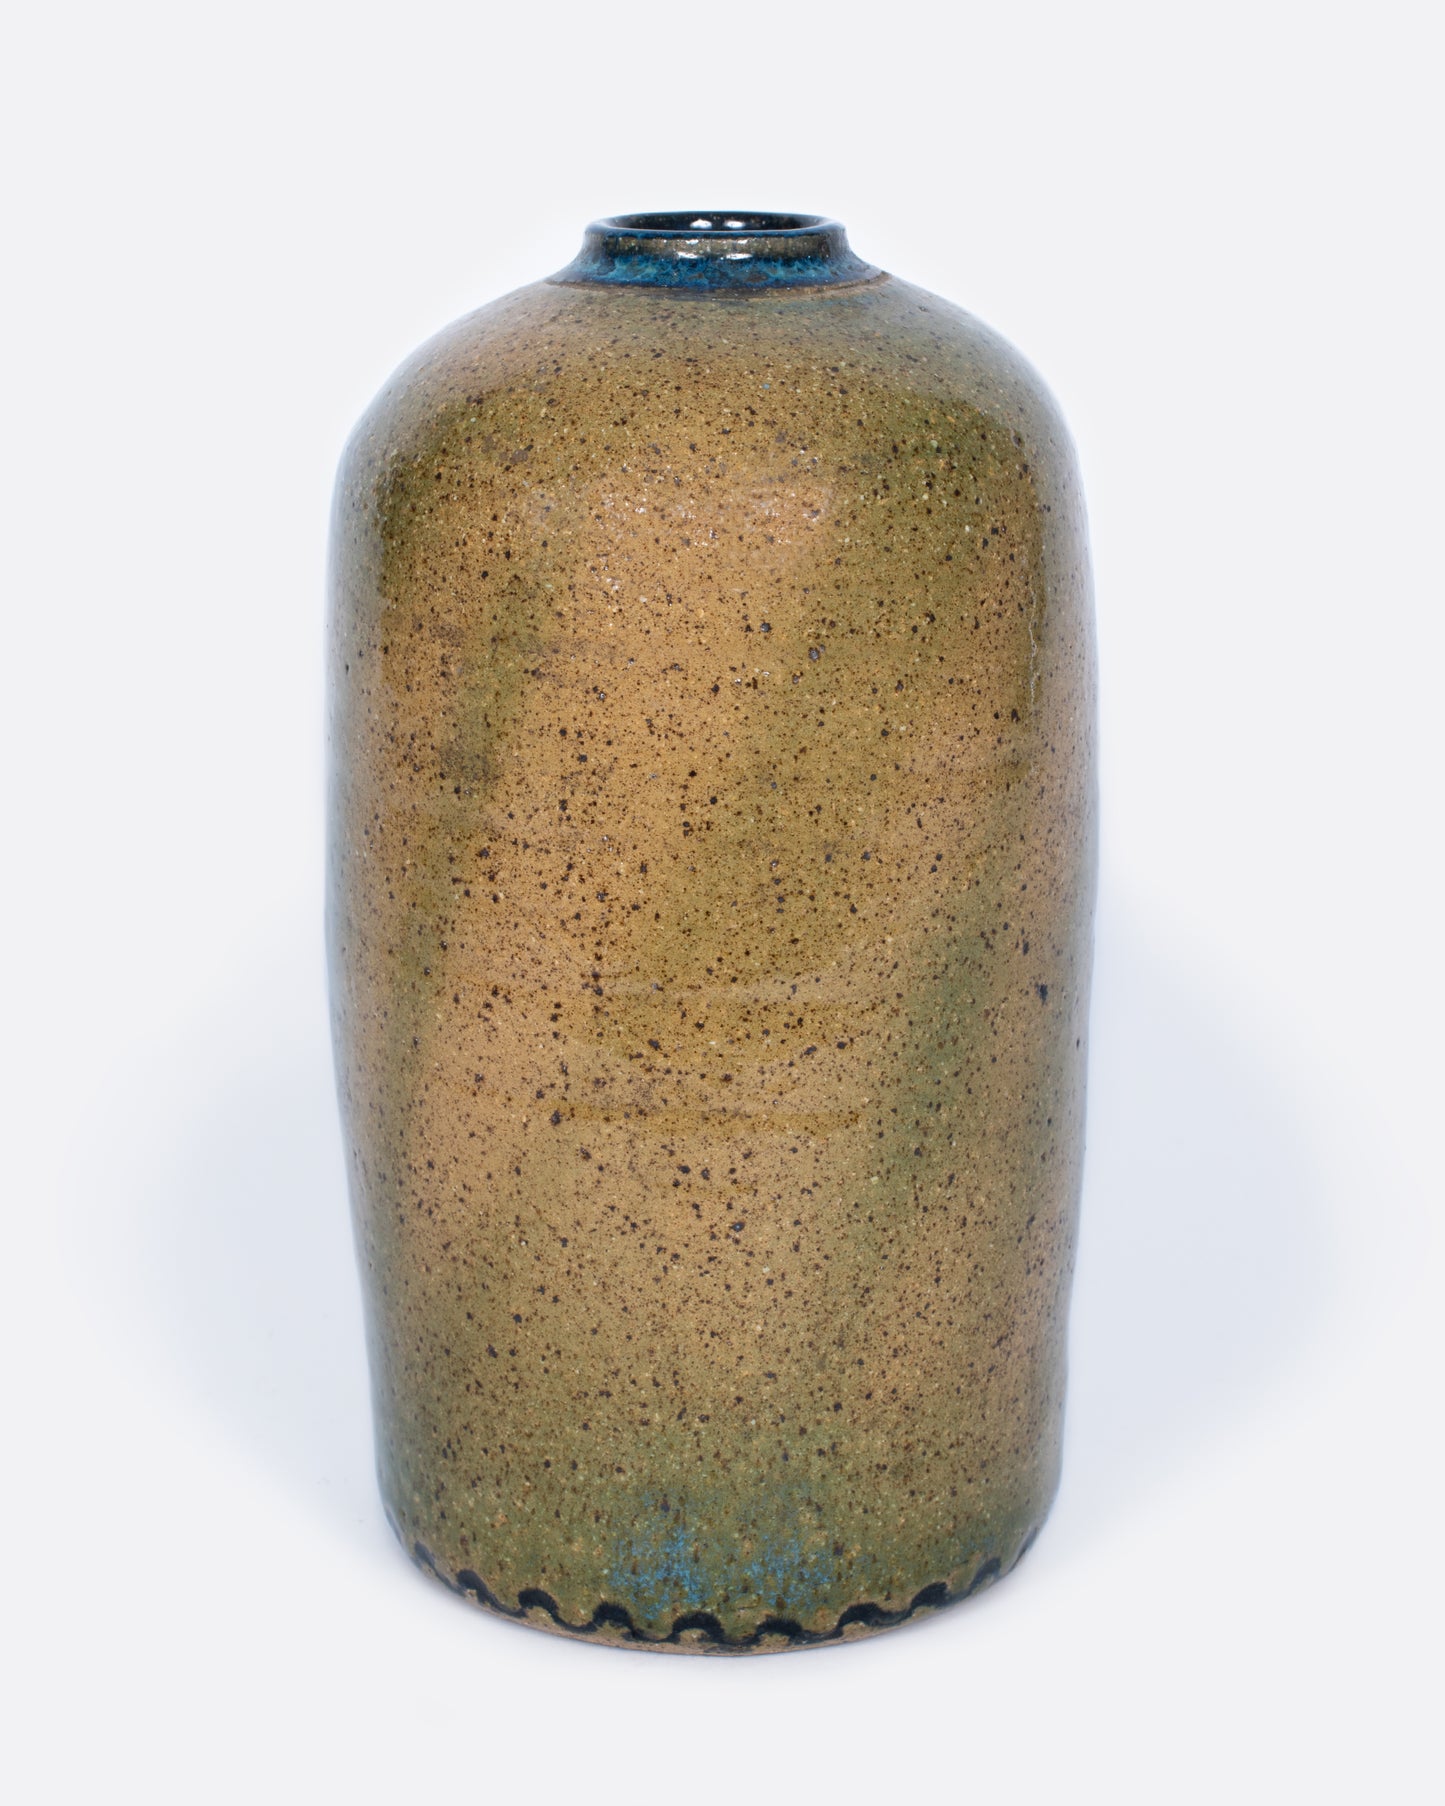 A cylindrical brown vase with swirls of blue and green glaze.